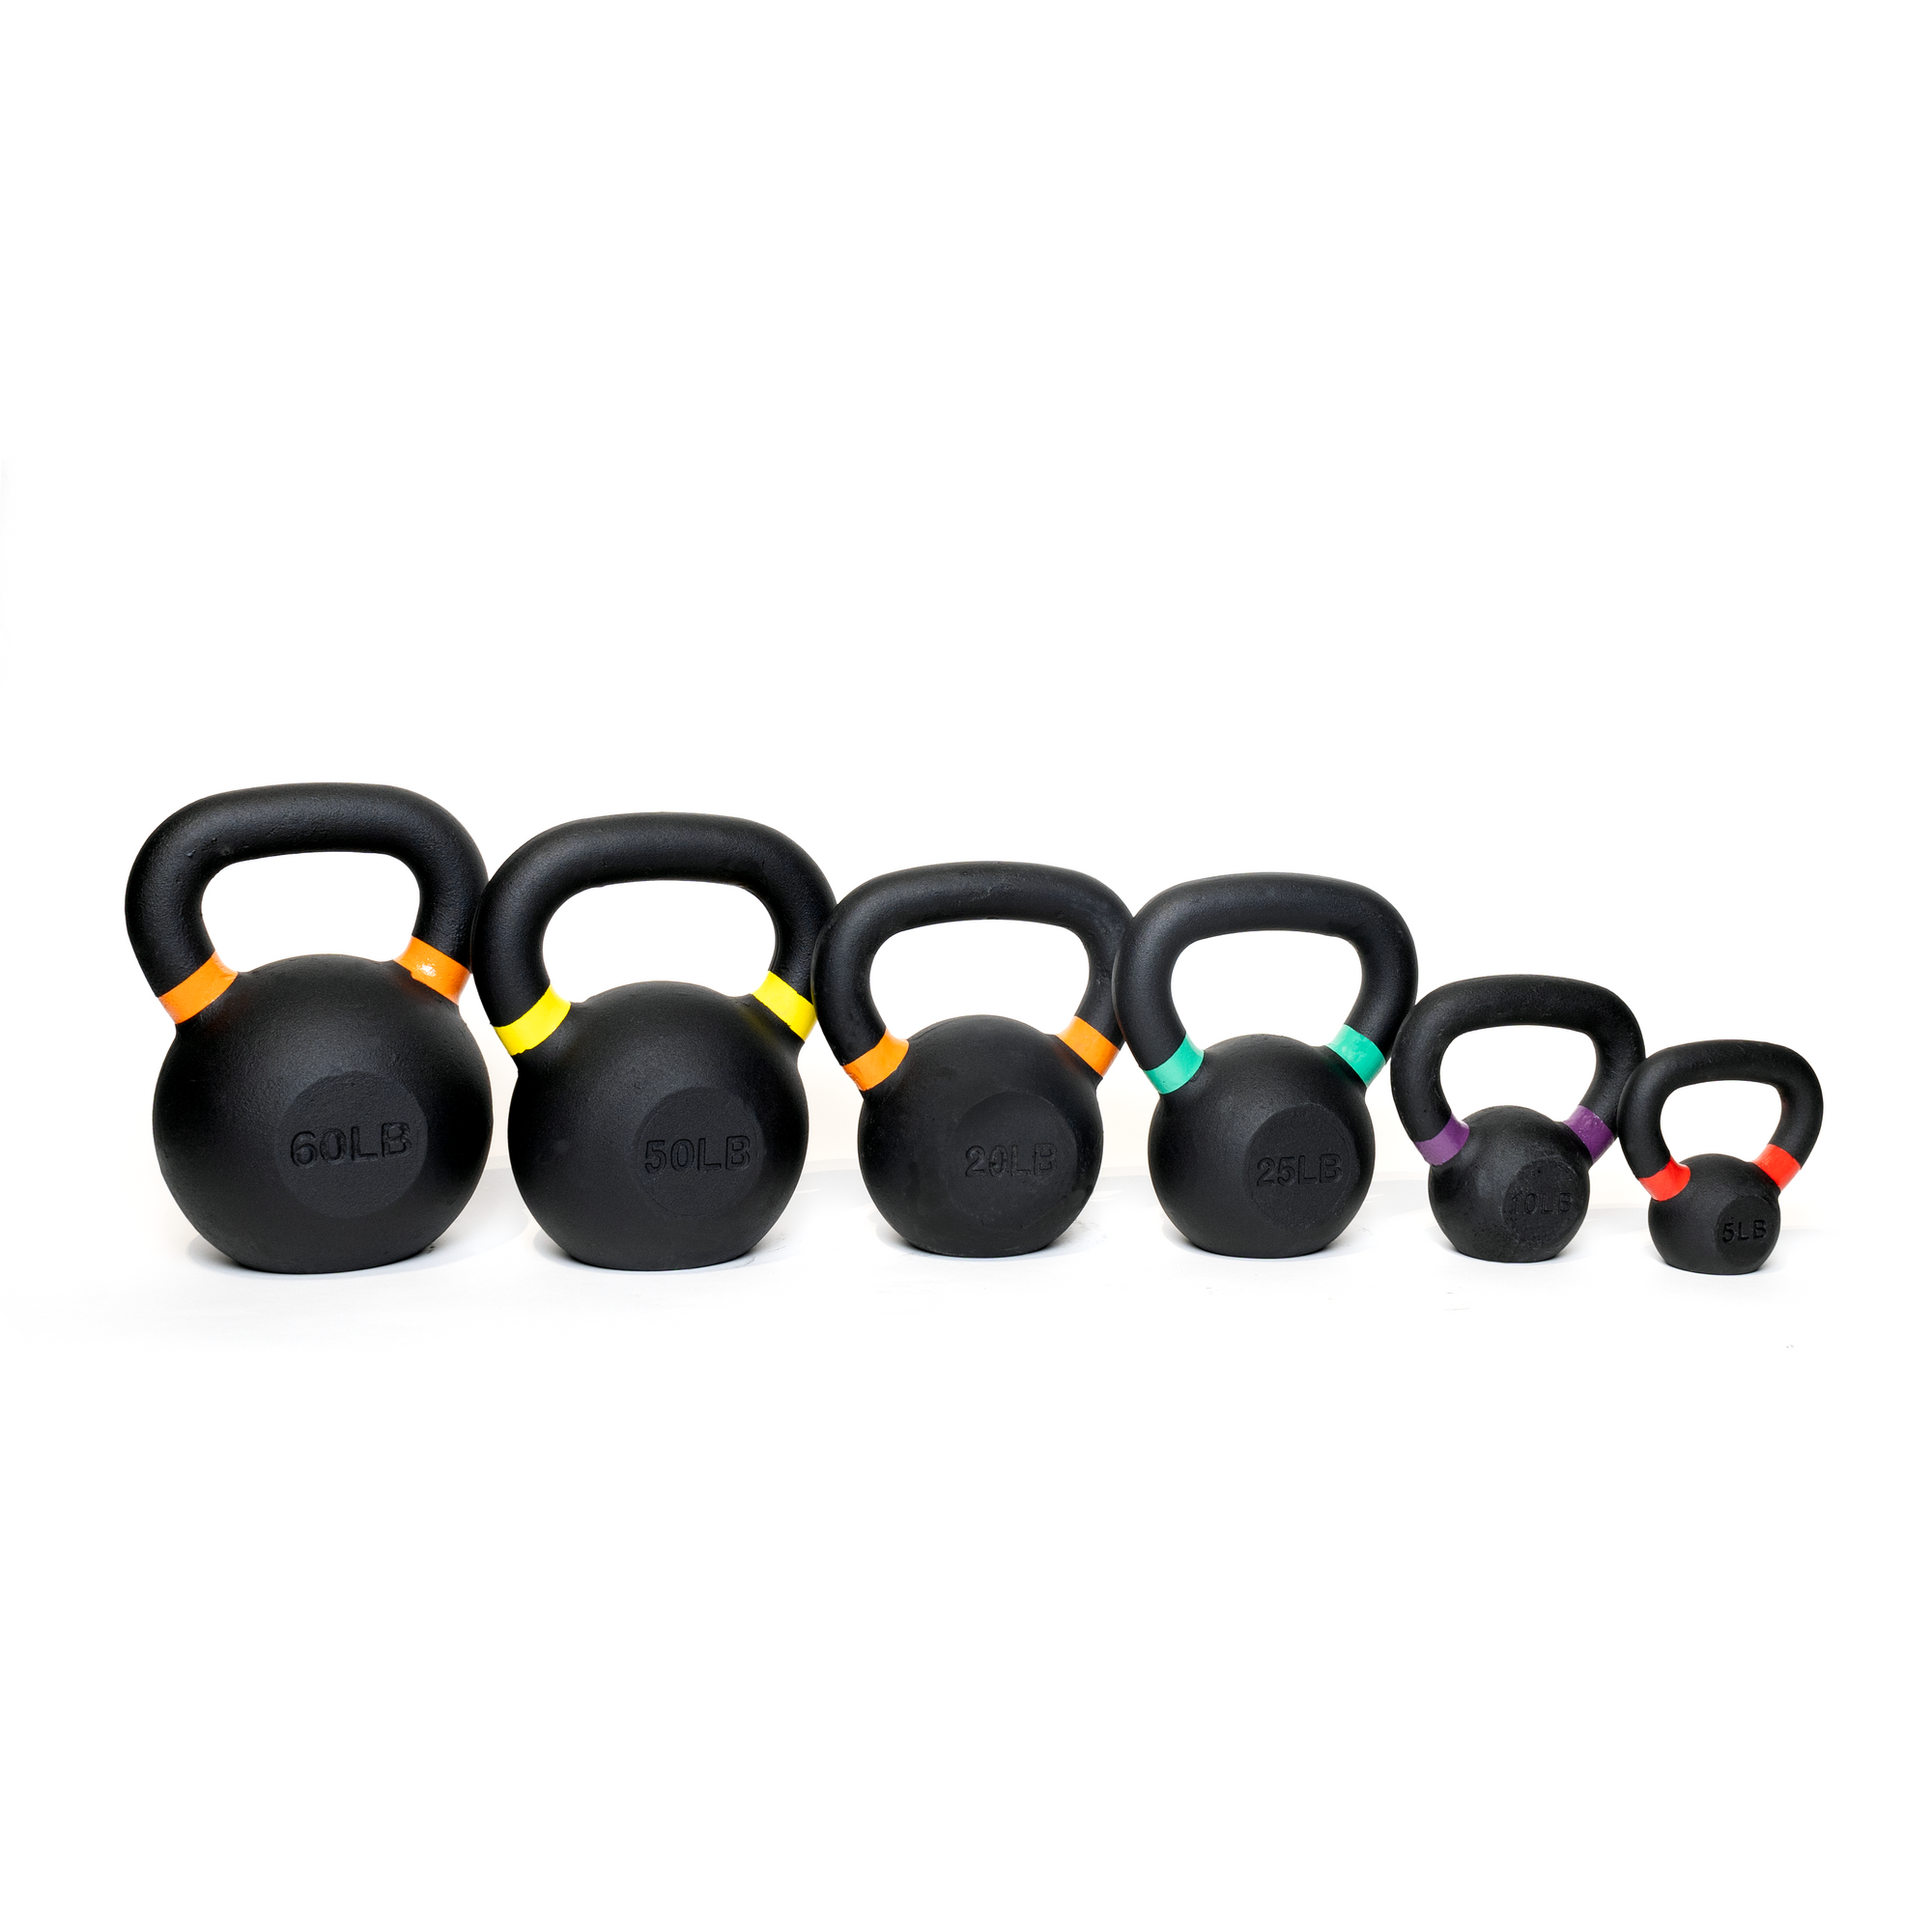 Fitway Cast Iron Kettlebell - 60lb